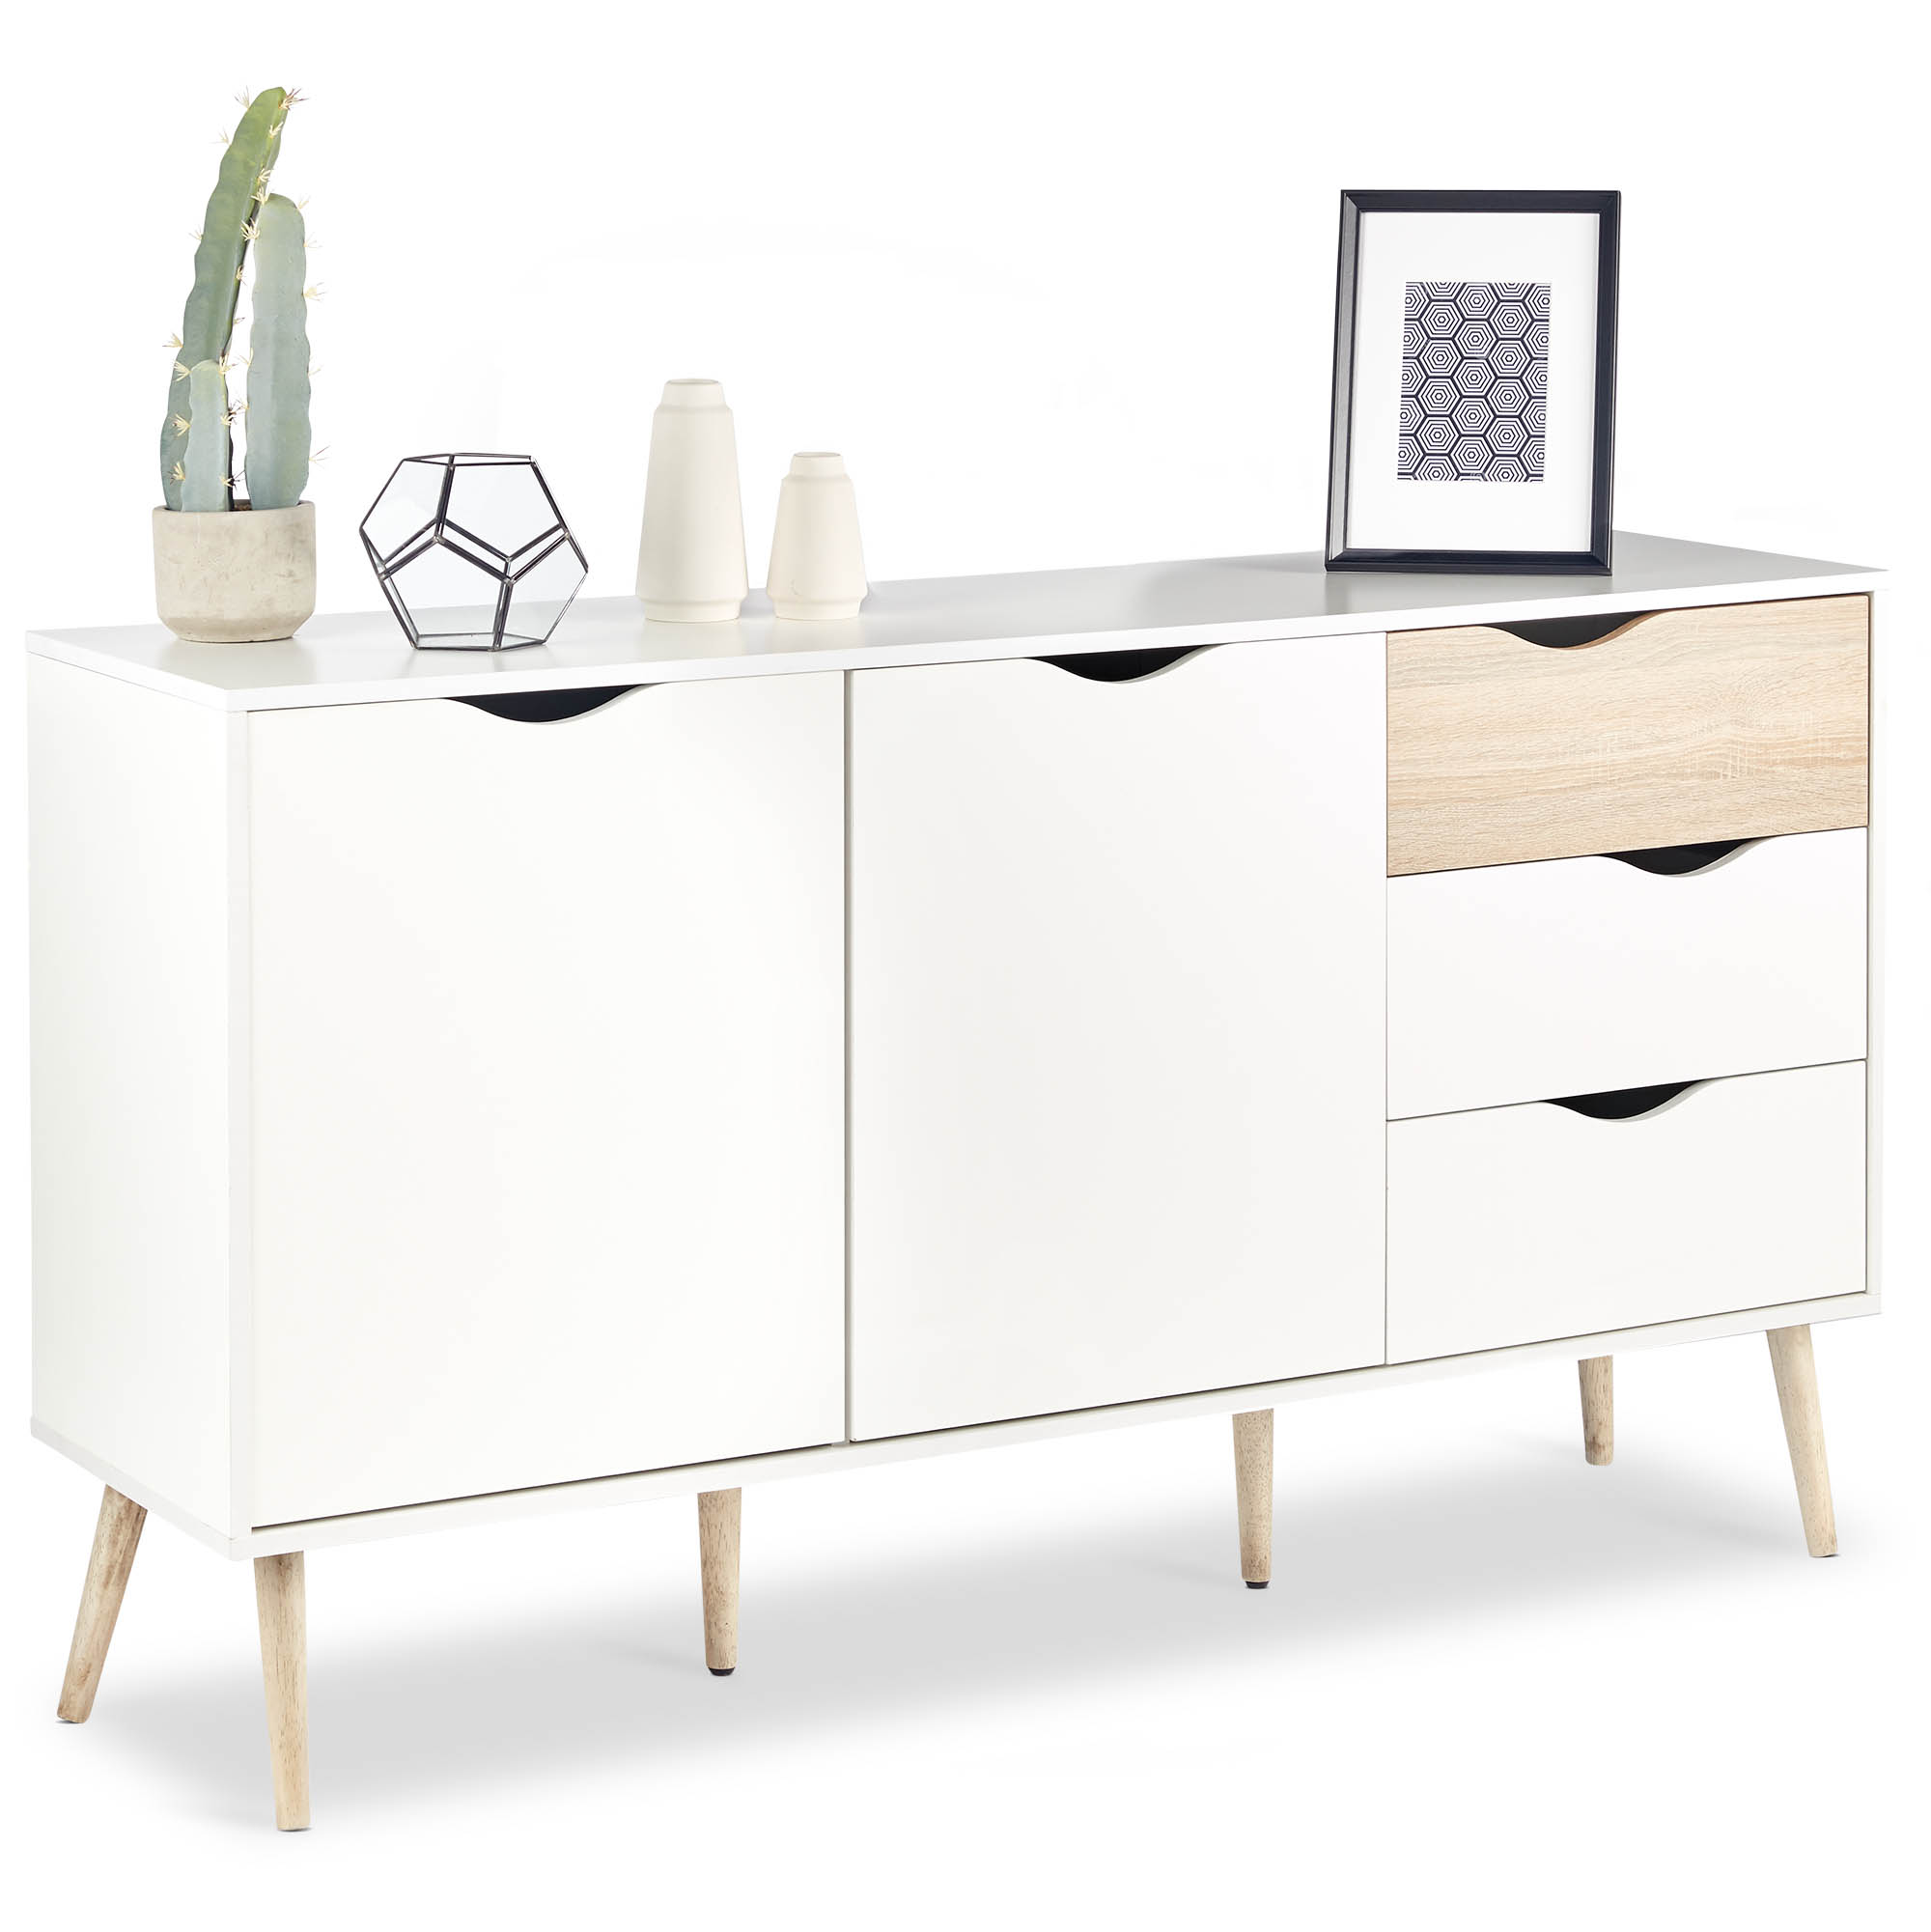 VonHaus Large Sideboard with Cupboard and Drawer combination - Scandinavian Nordic Style - White and Light Oak Effect